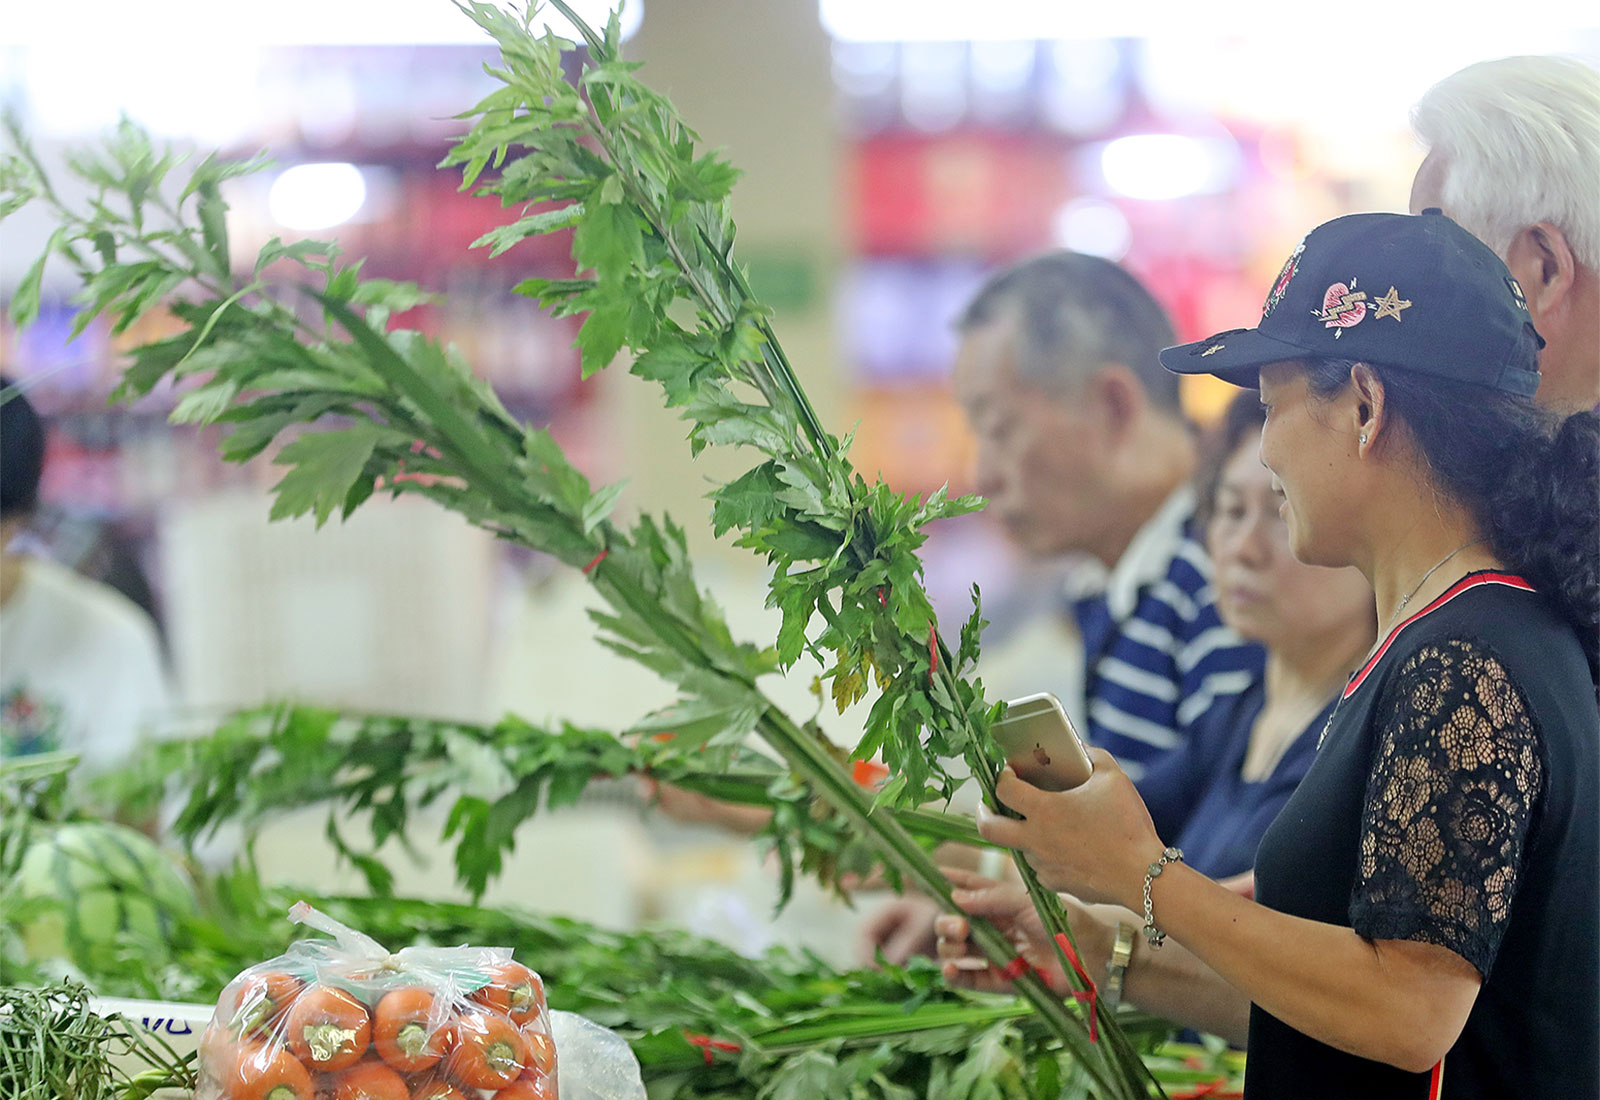 People holding long stalks of mugwort in a grocery store in Hangzhou, Zhejiang Province of China